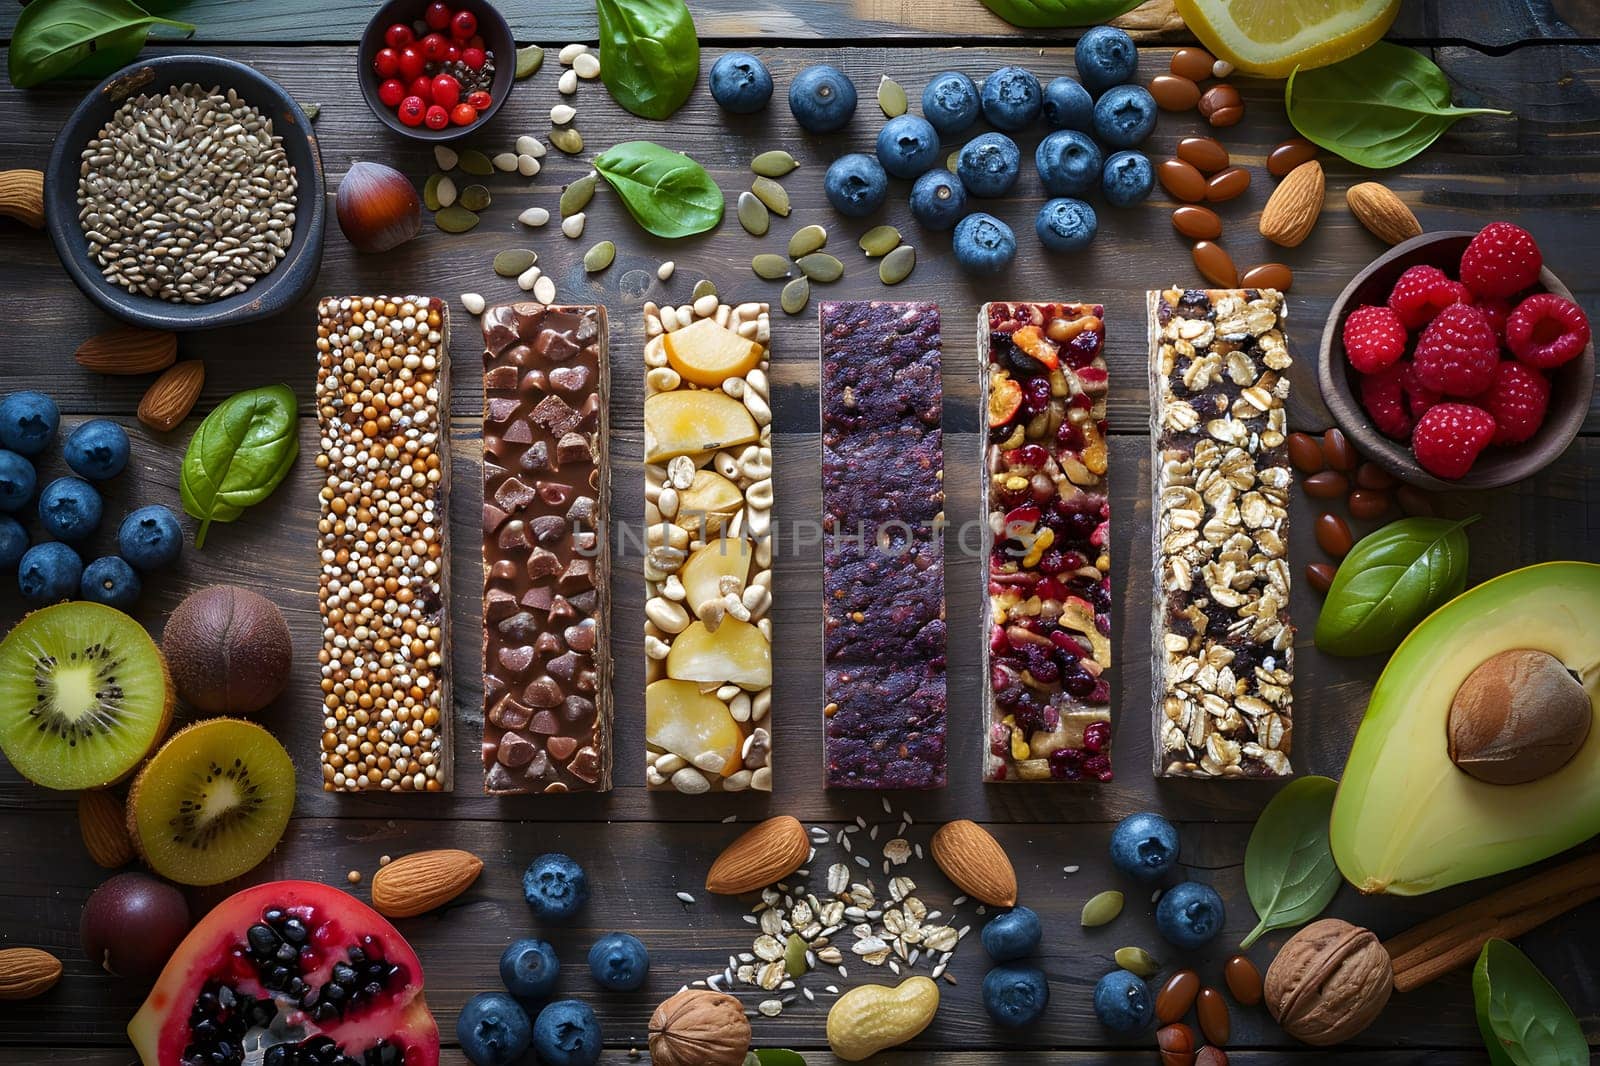 A picturesque wooden table displaying an array of natural foods like fruits, nuts, and granola bars, arranged in a creative artsy pattern